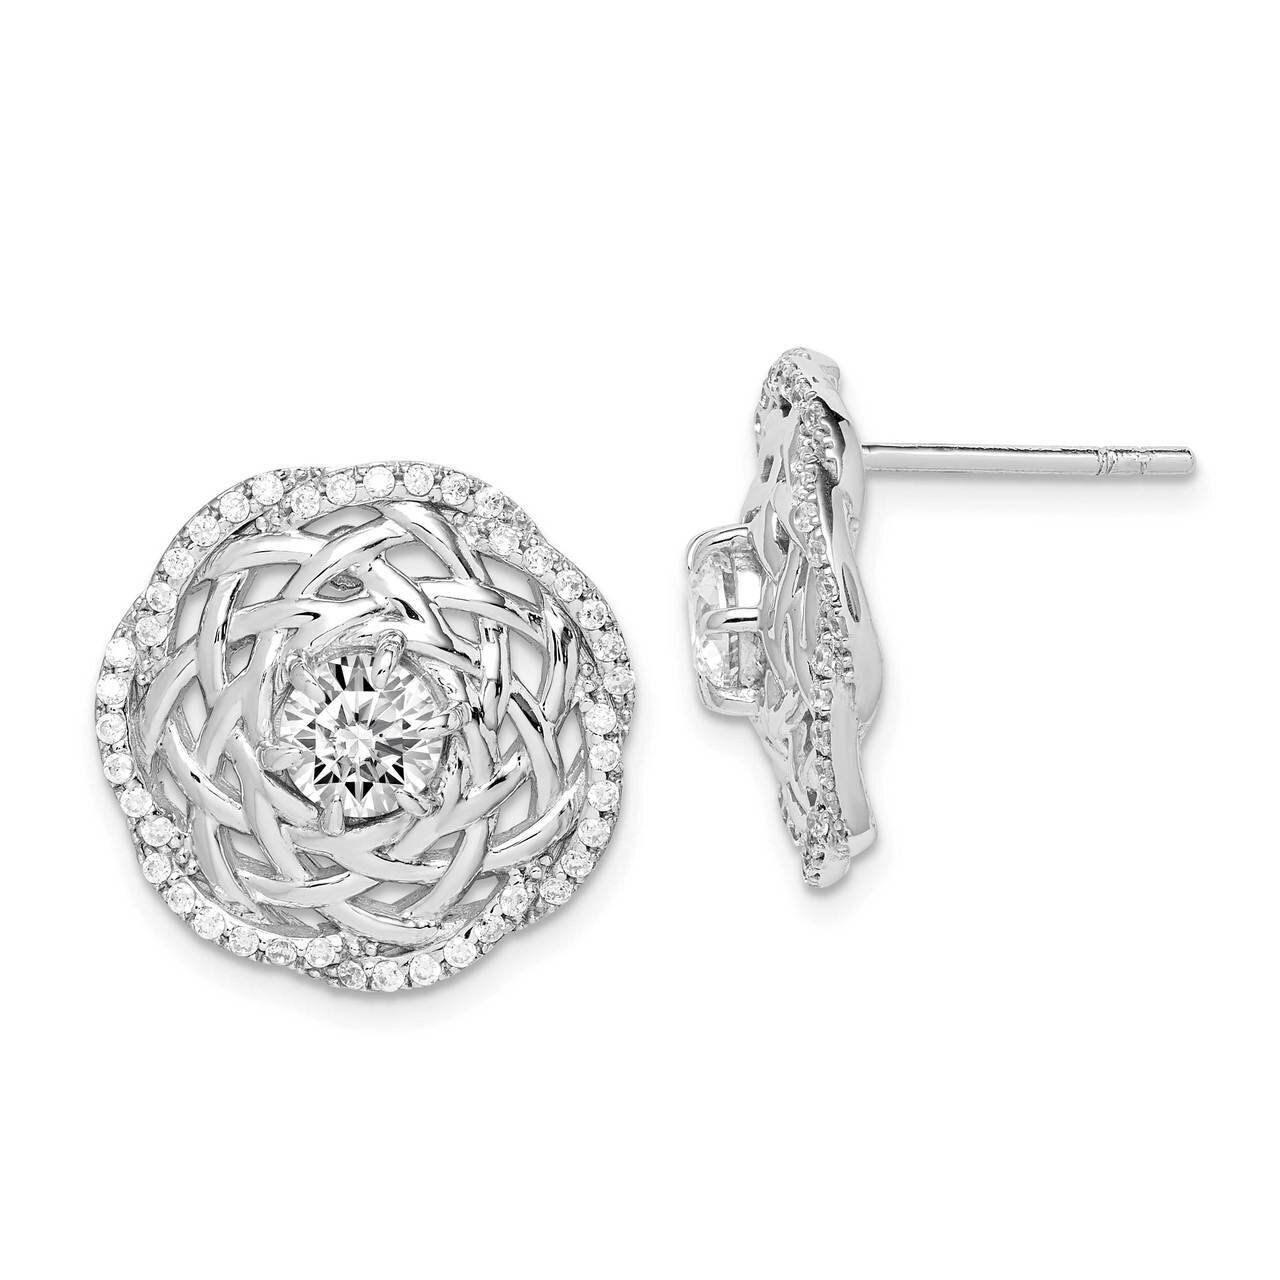 5mm CZ Diamond Center Woven Post Earrings Sterling Silver Rhodium-plated QE14228